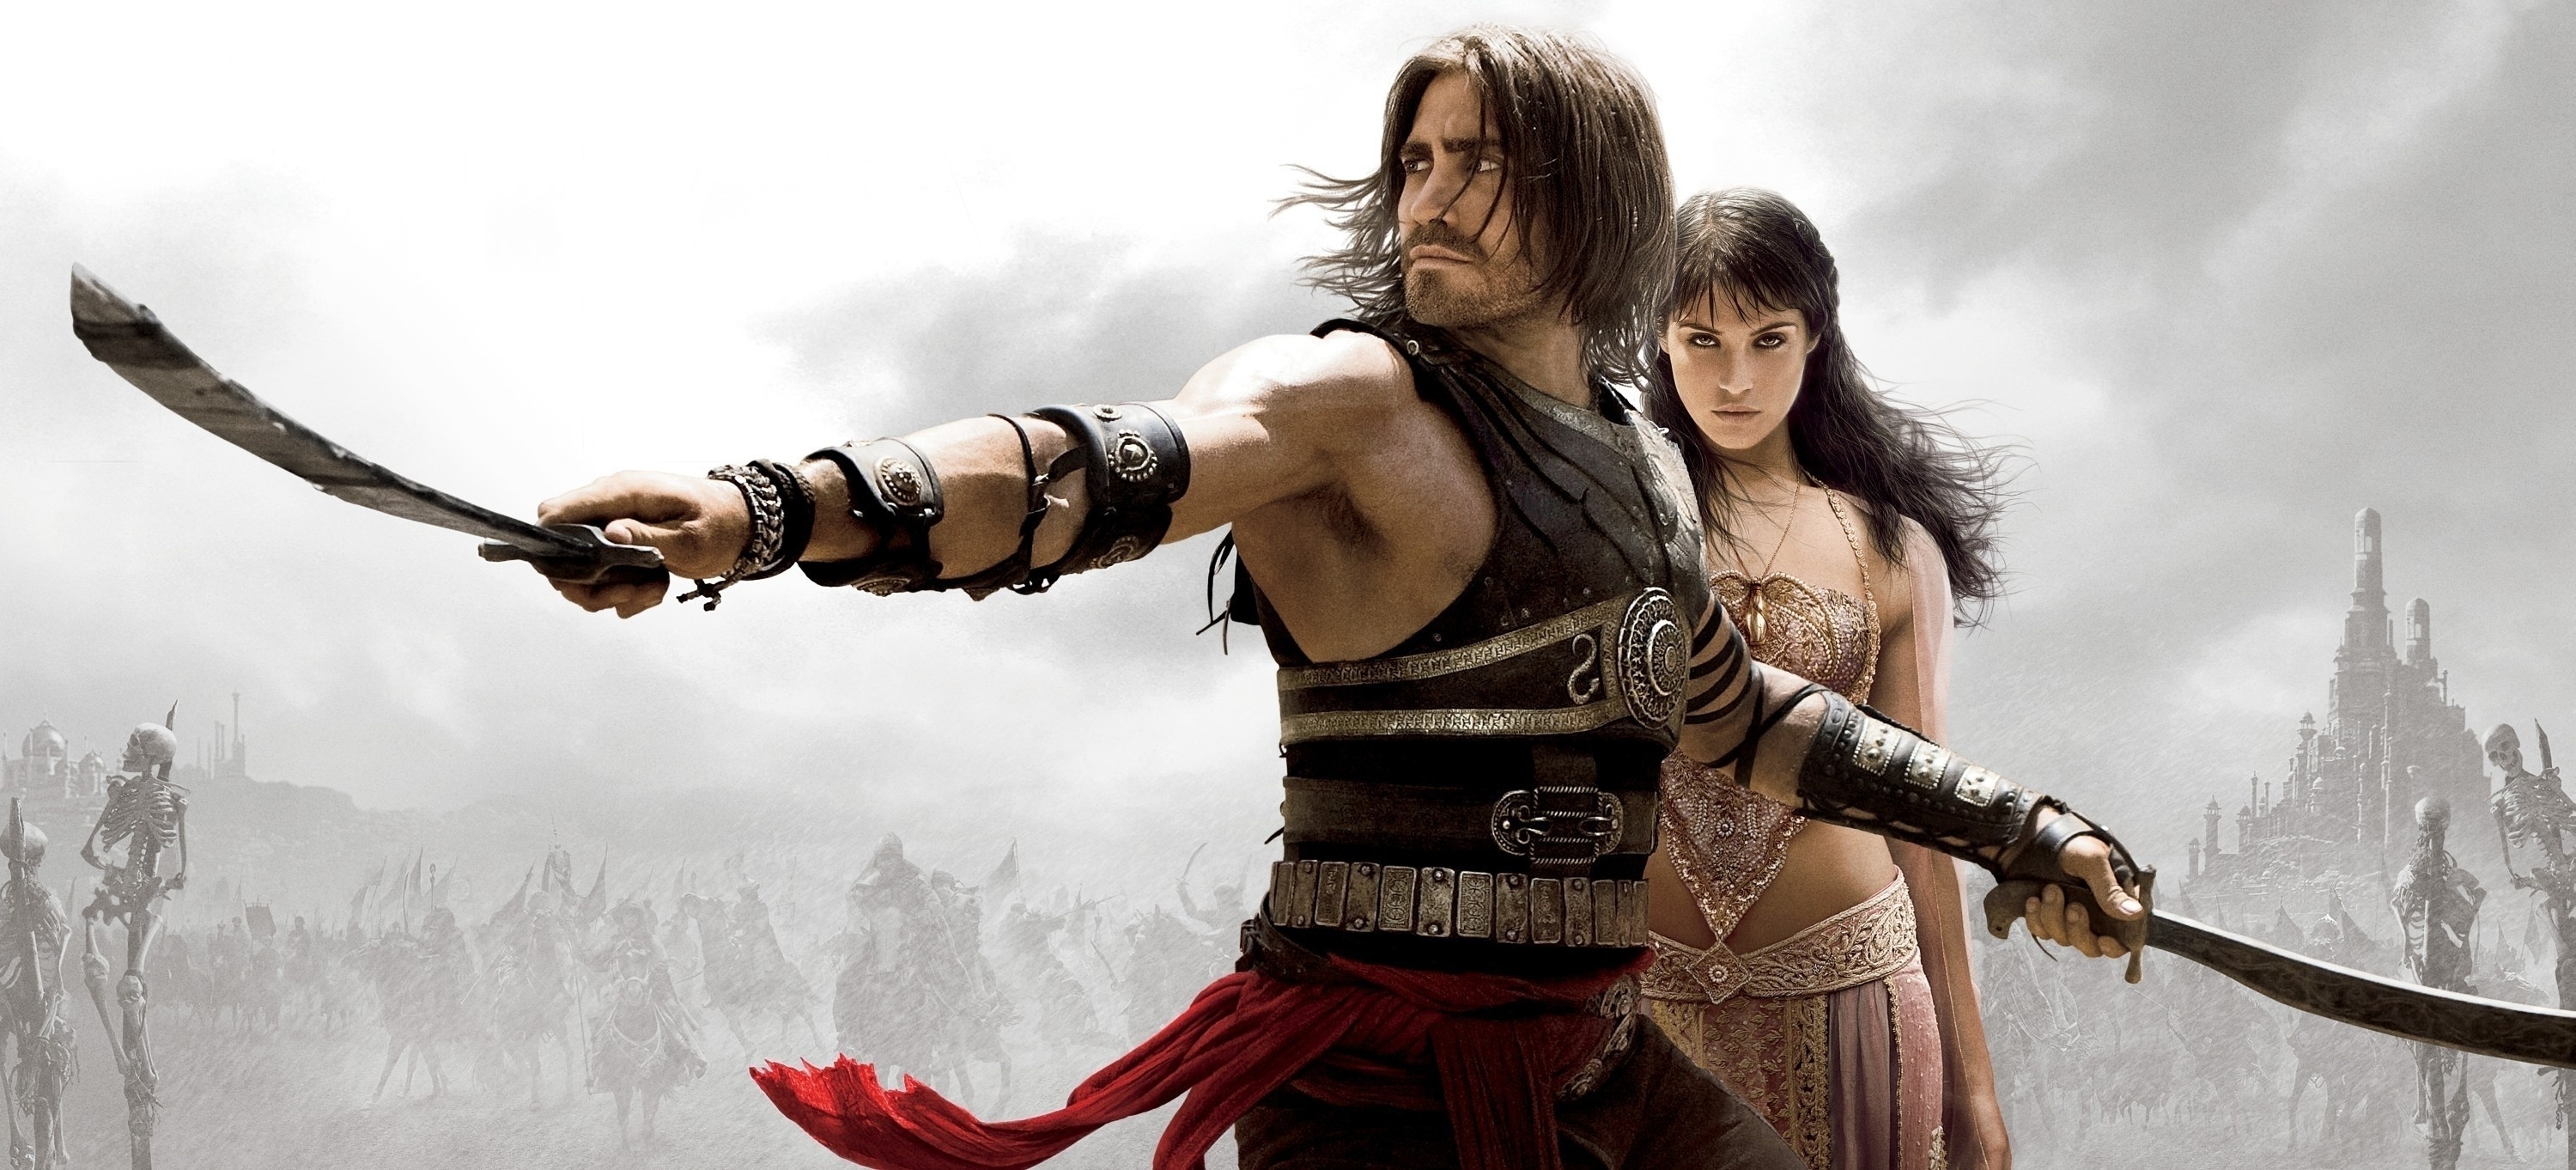 Prince Of Persia The Sands Time HD Wallpaper Background